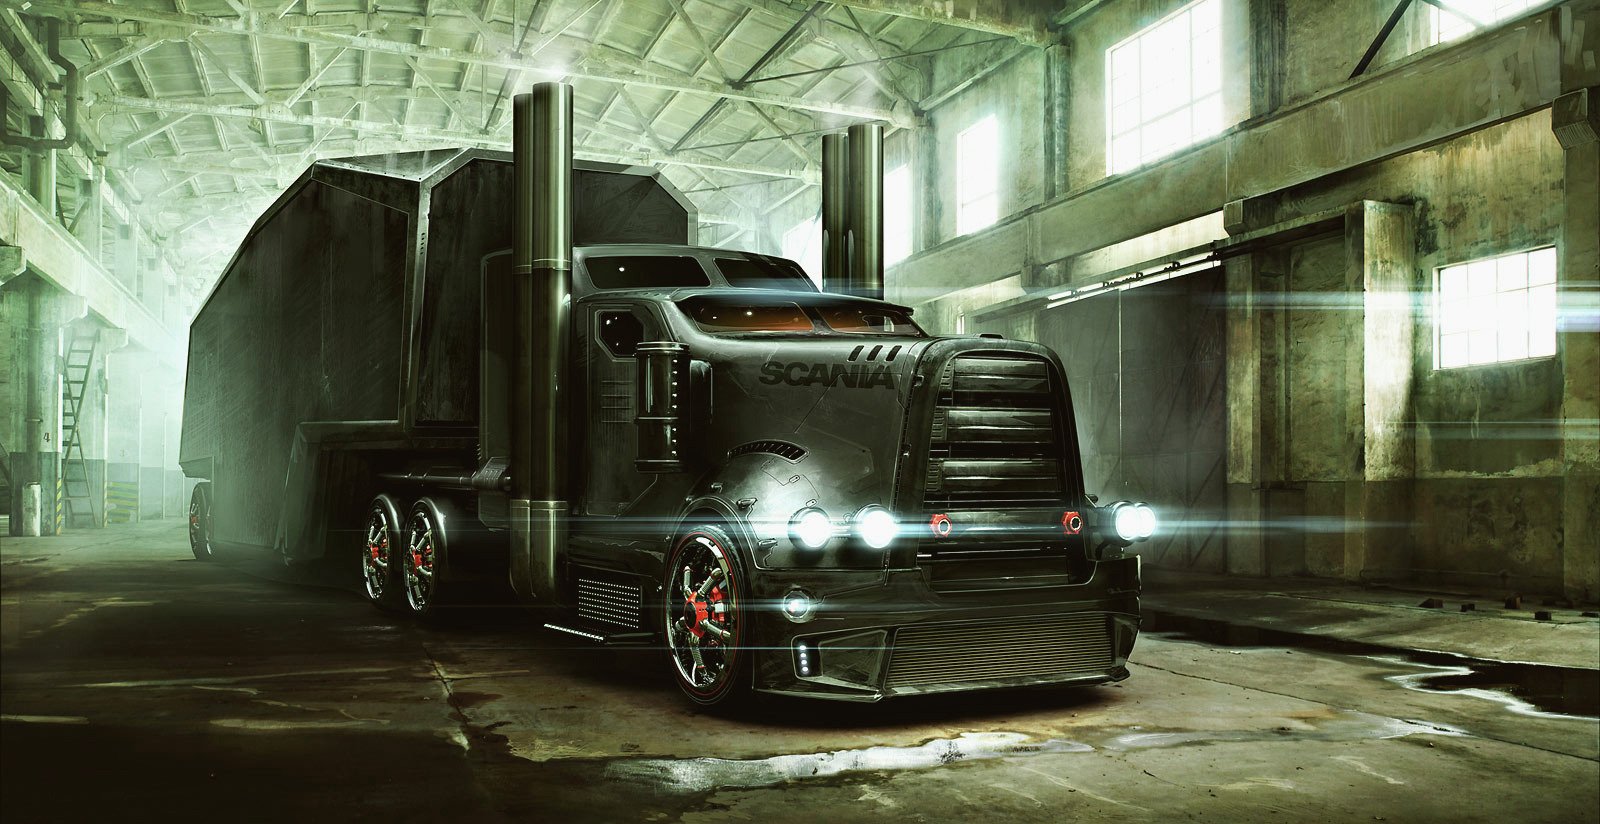 299 Truck HD Wallpapers | Backgrounds - Wallpaper Abyss